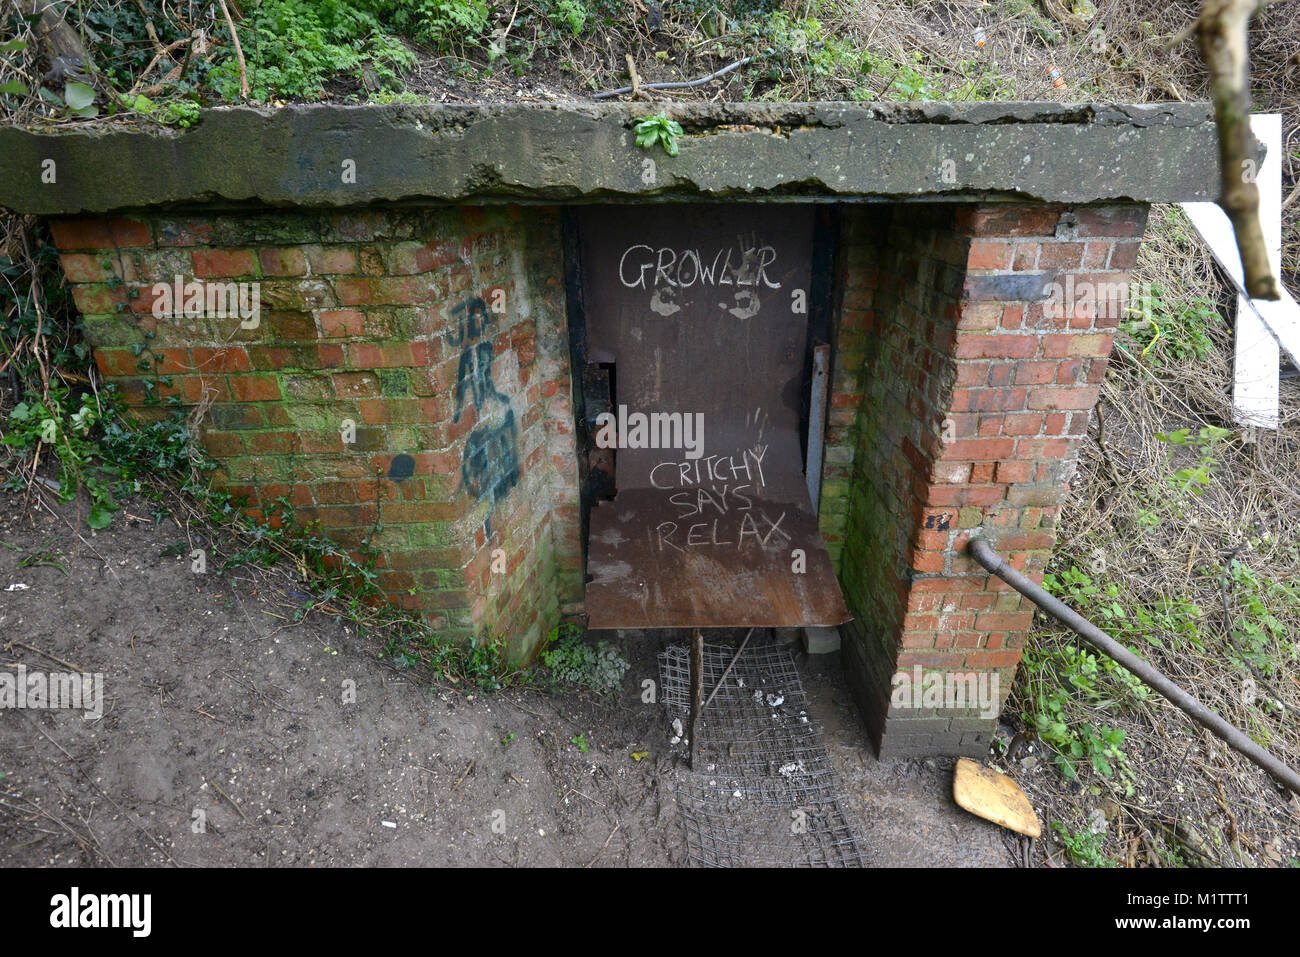 Entrance to former top secret WWII communications bunker, HMS Forward, Heighton Hill, Newhaven, East Sussex. Stock Photo